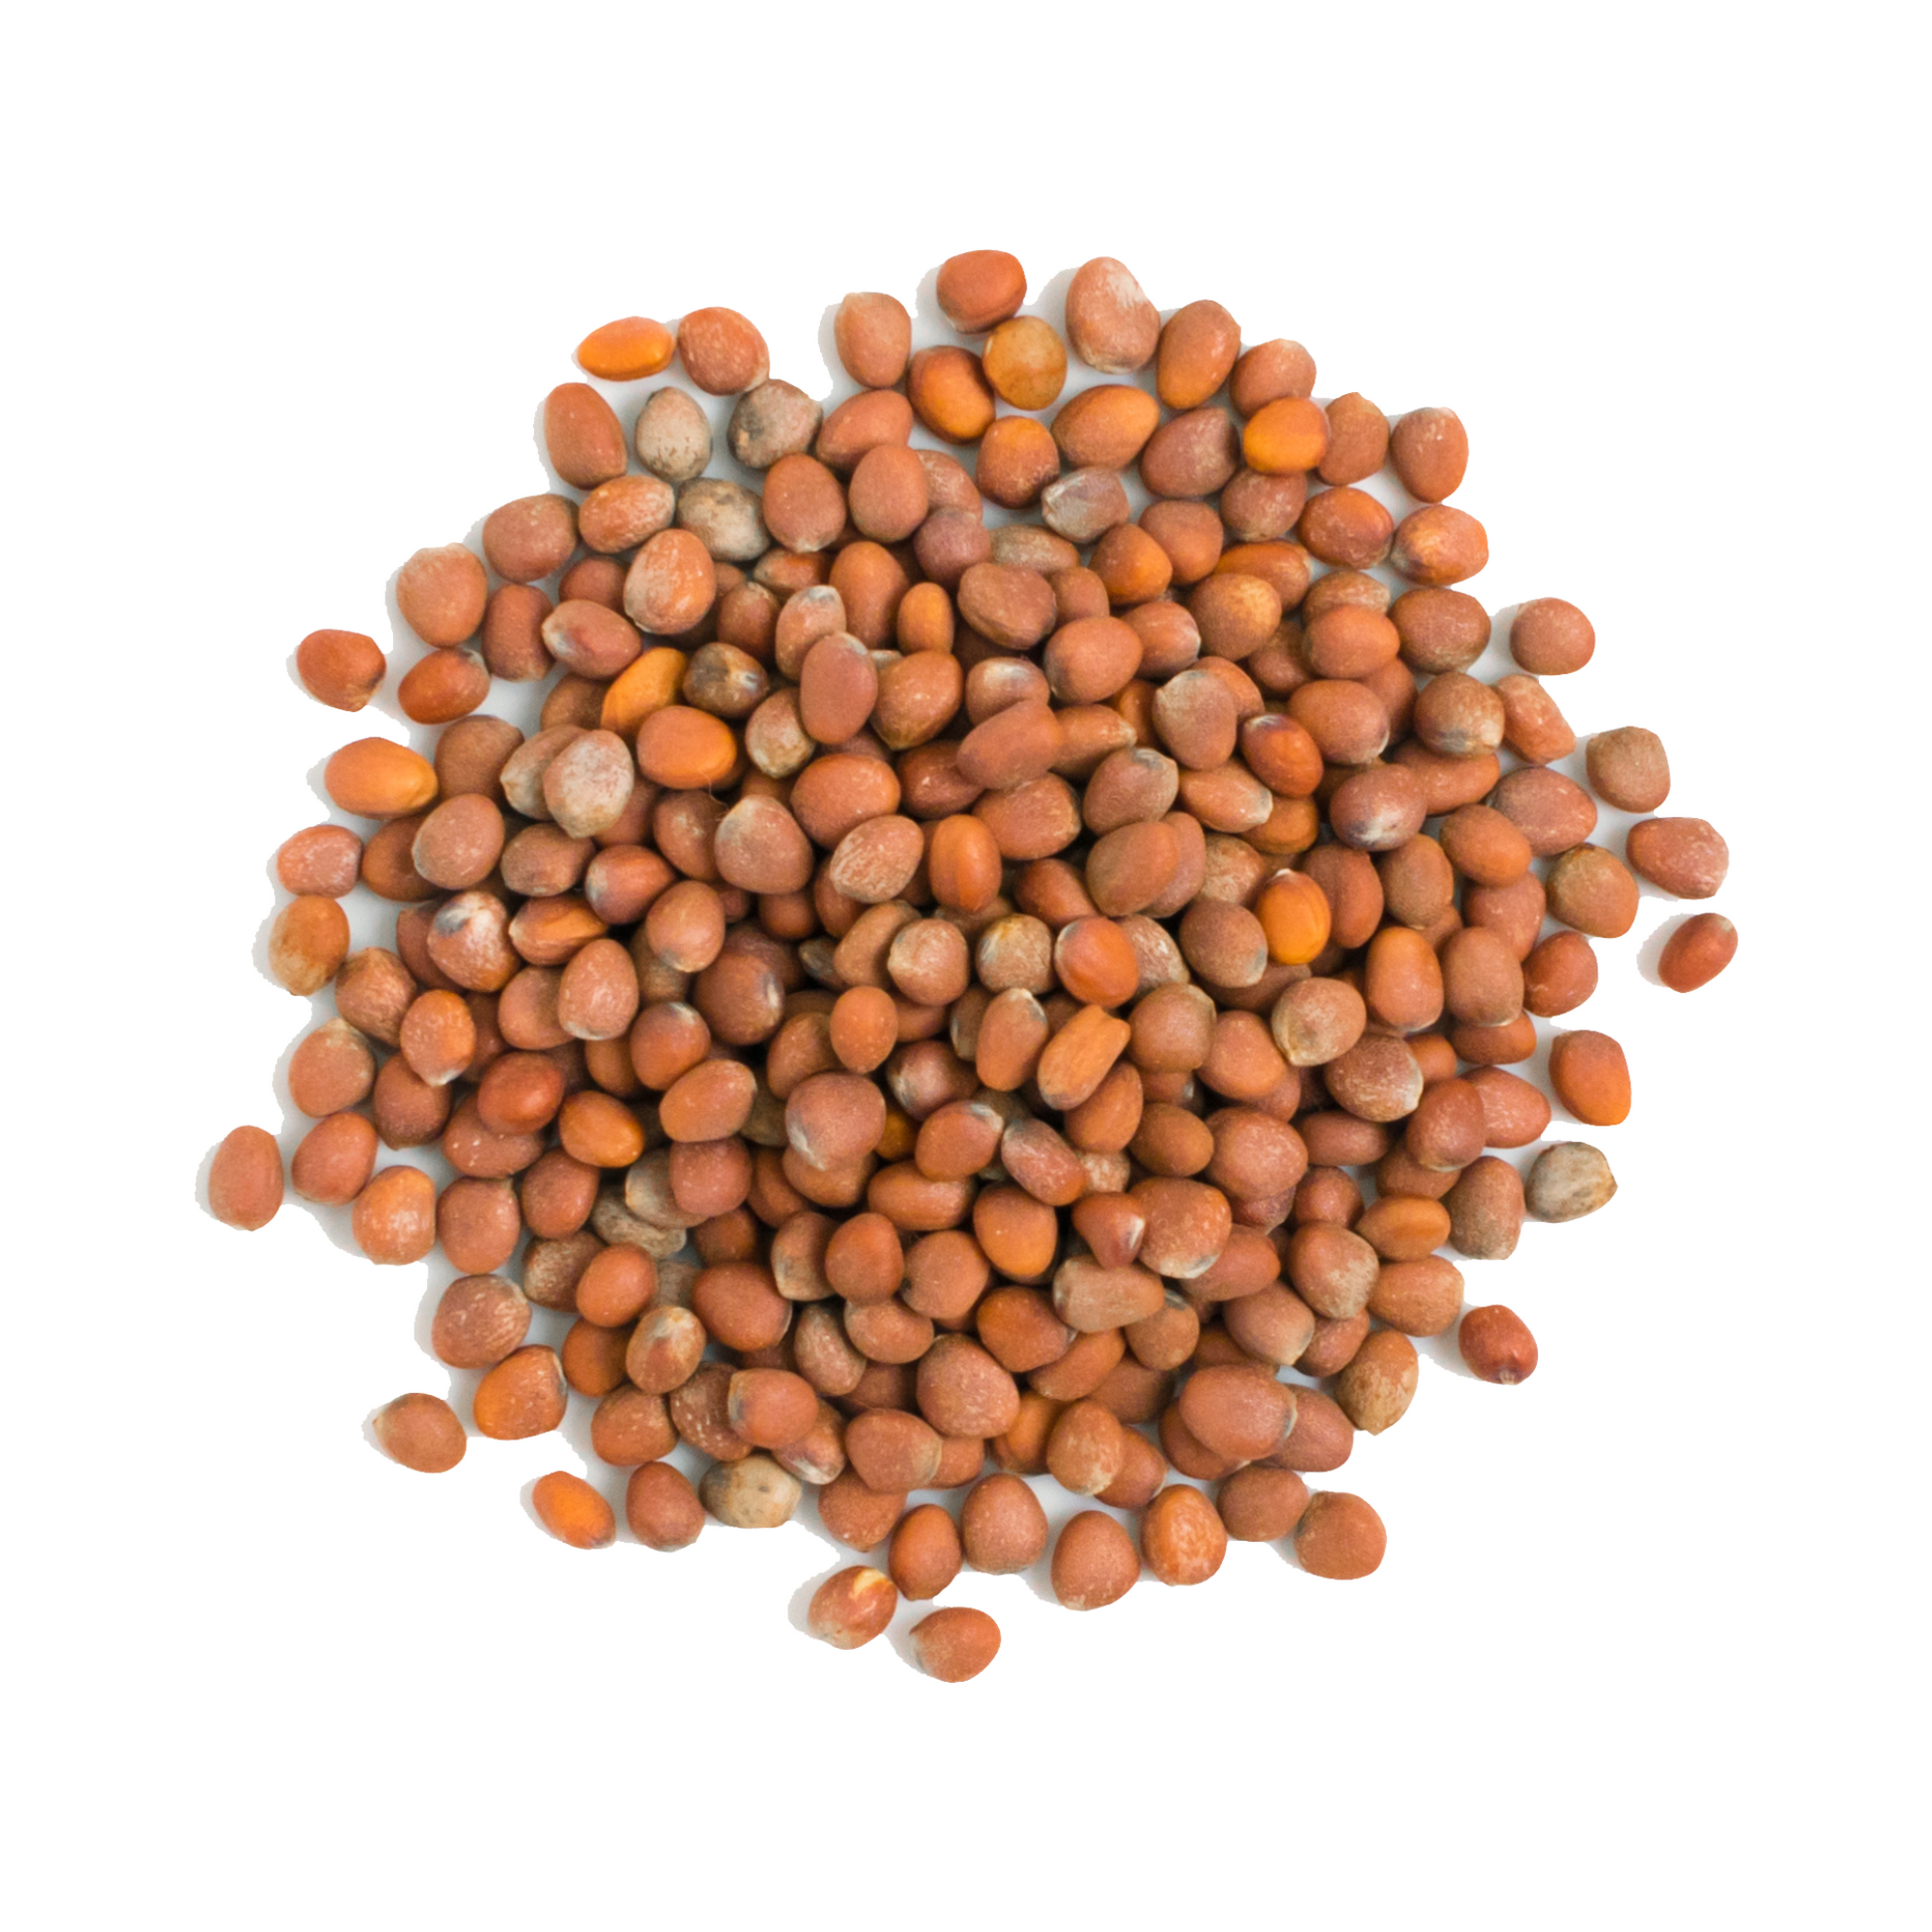 Pile of Cherry Belle radish seeds displayed on a white background